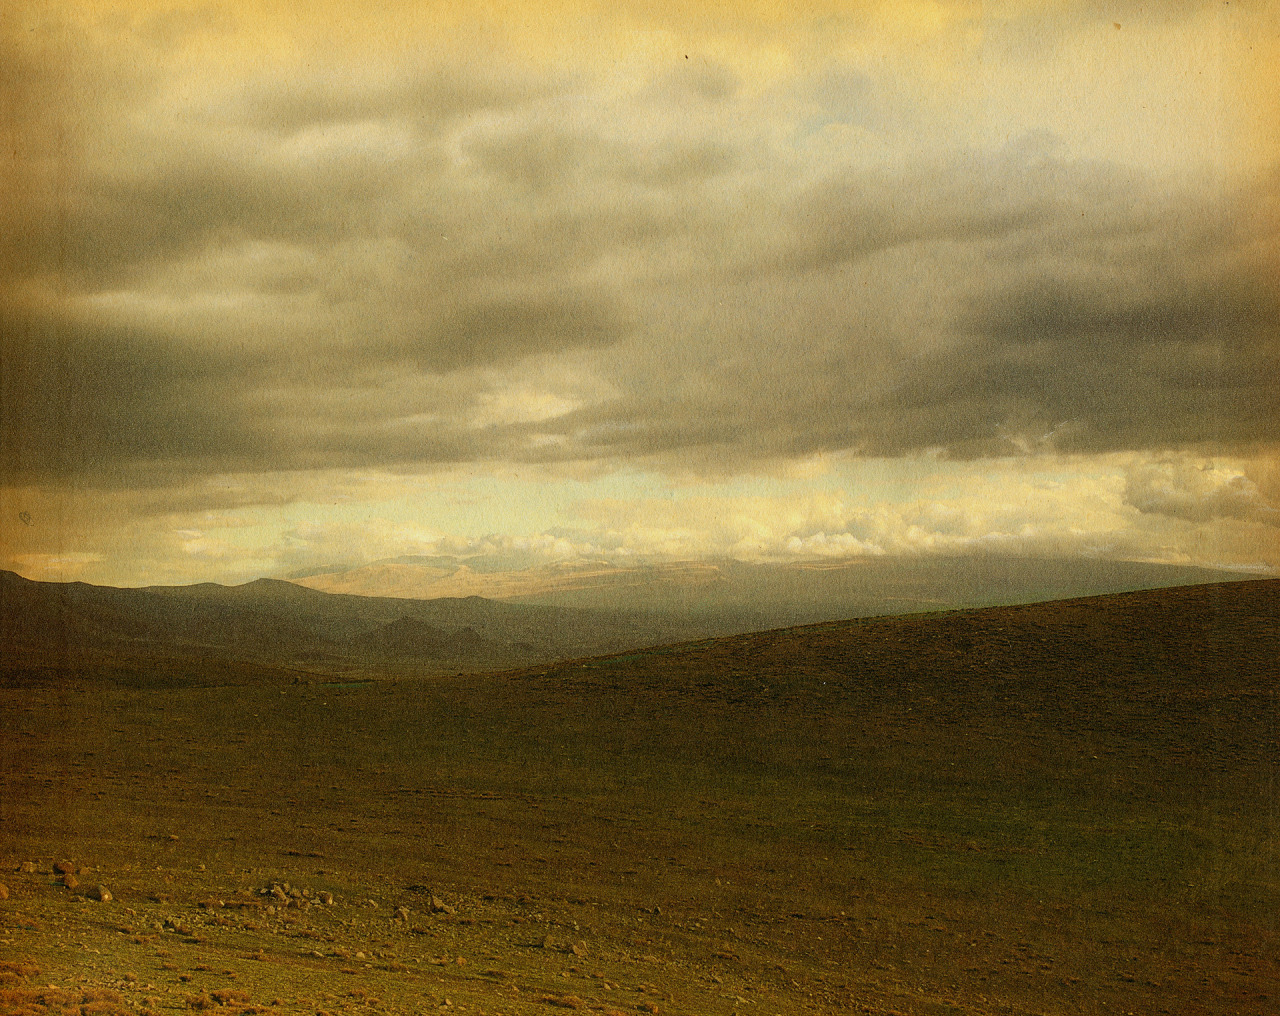 Armenian landscape.  Archival pigment print with colored pencil on paper, 2013, by David Sollie.